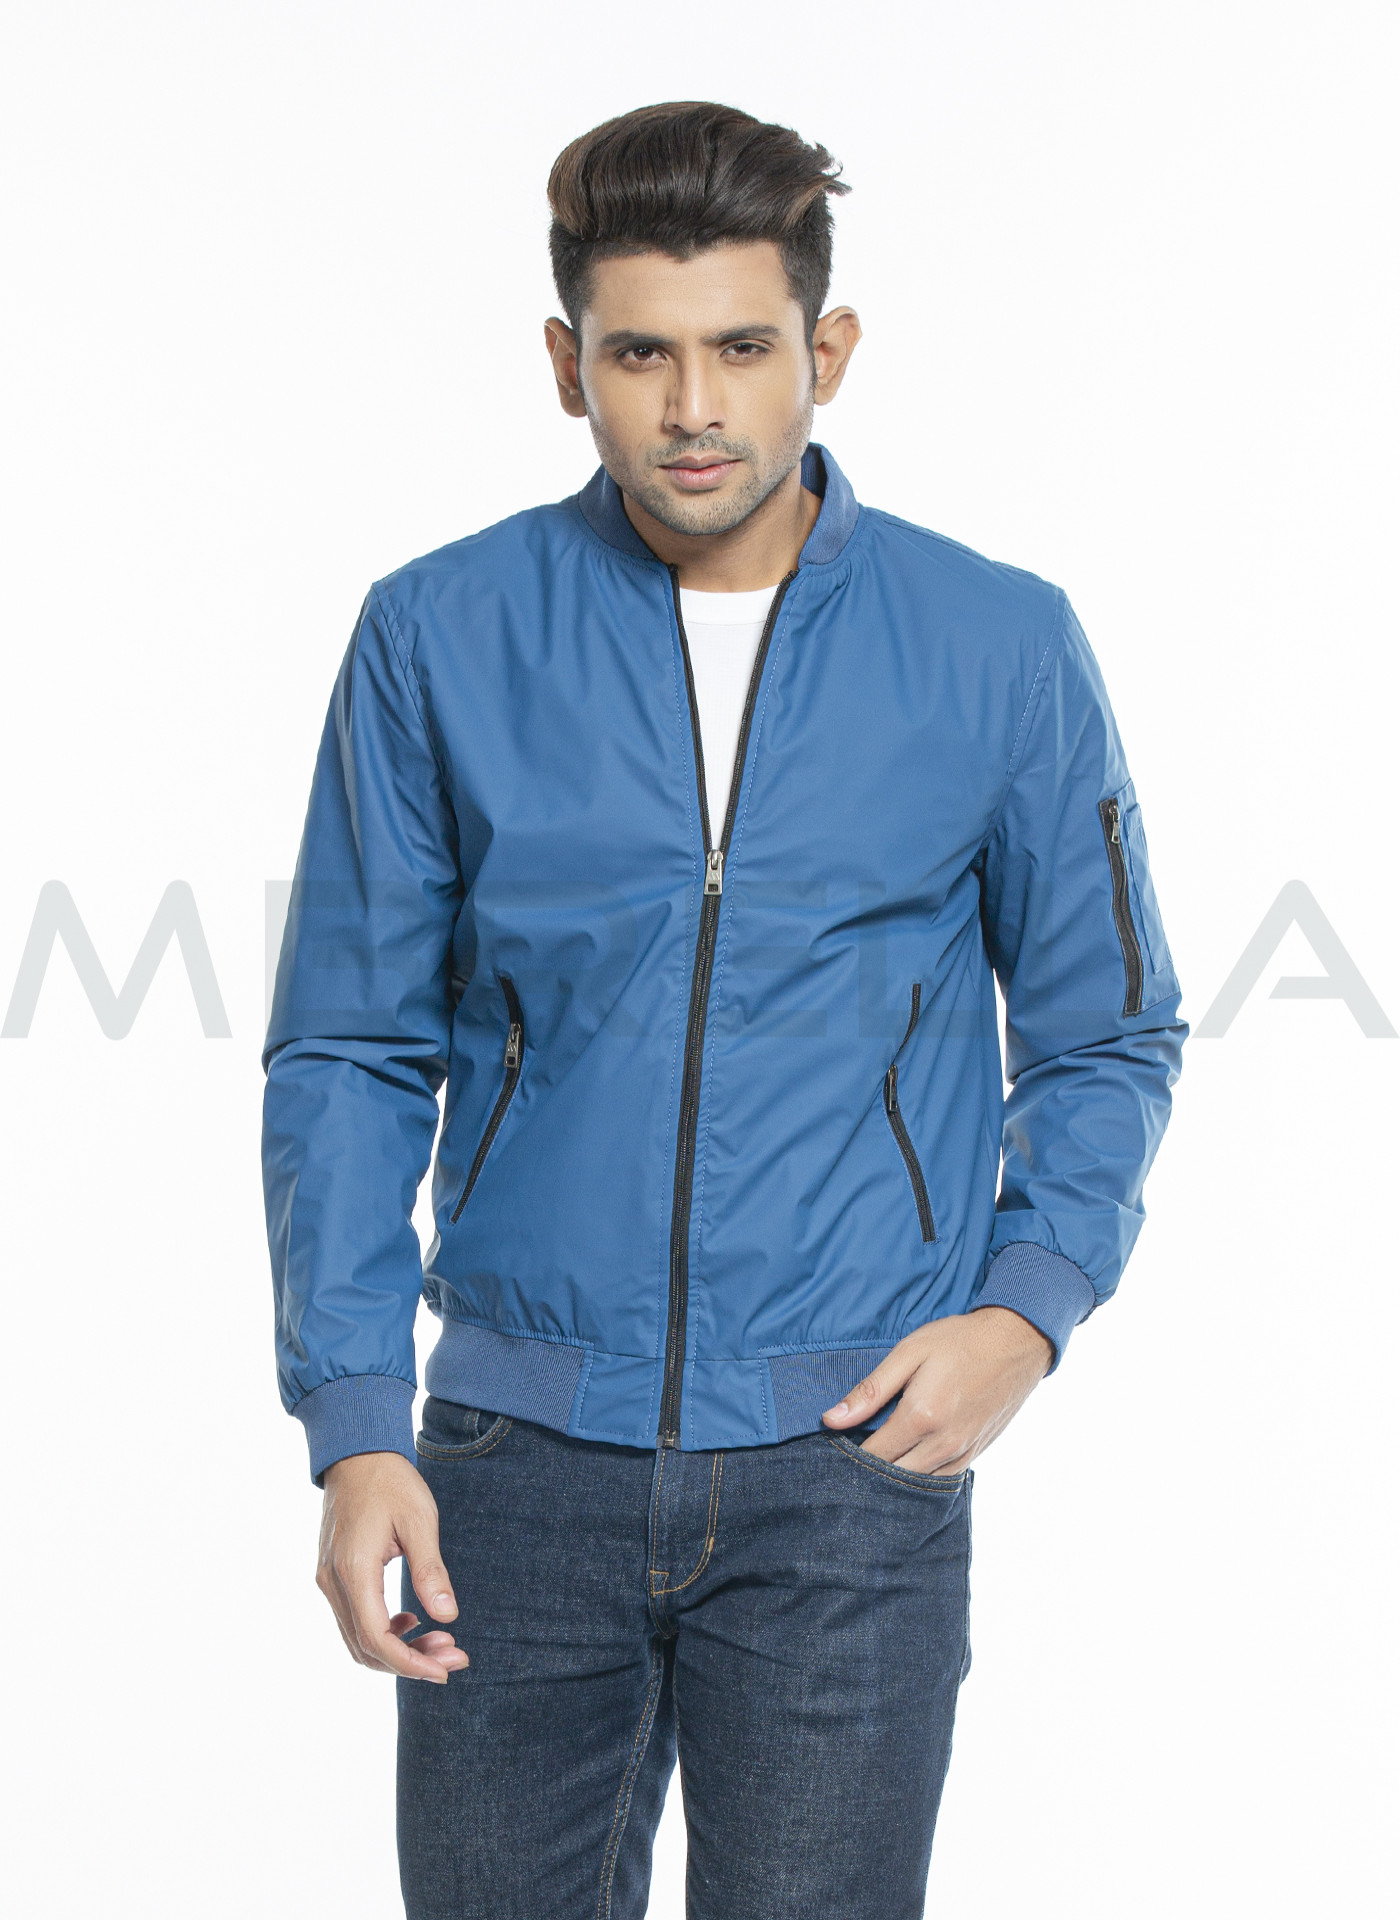 JACKET | Mbrella Limited - A Lifestyle Clothing Brand